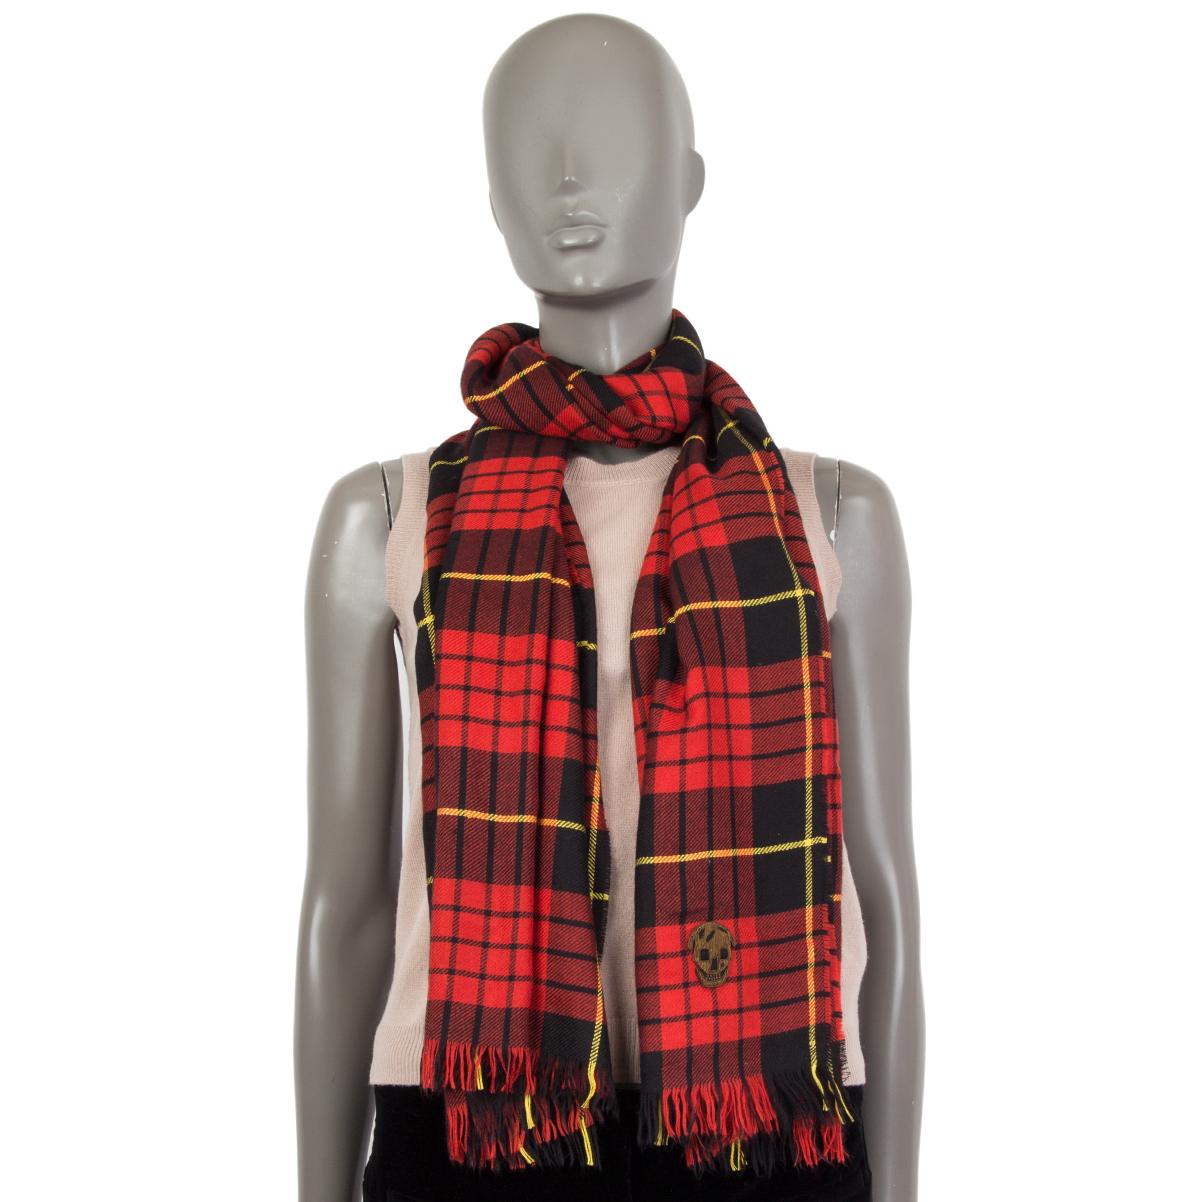 Alexander McQueen tartan shawl in red, black and yellow cashmere (100%) with embroidered skull appliquee. Has been worn and is in virtually new condition.

Width 75cm (29.3in)
Length 180cm (70.2in)